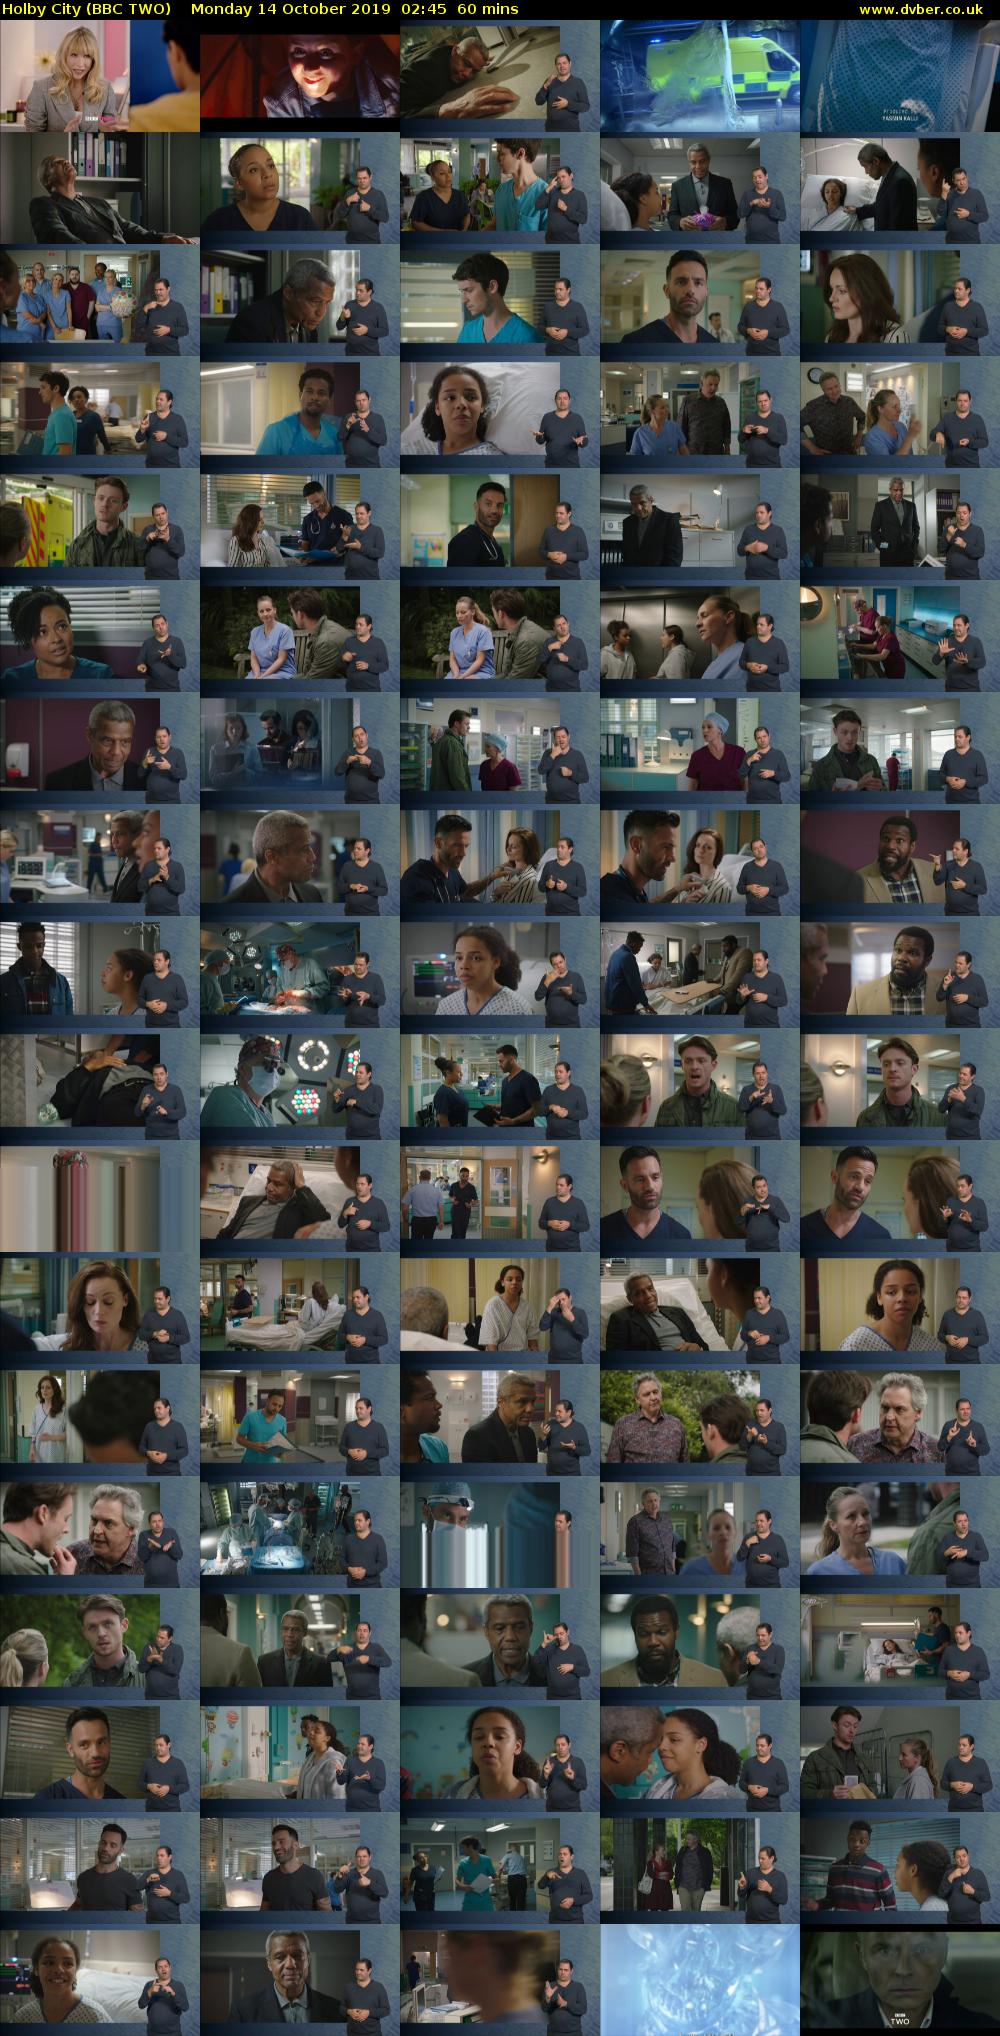 Holby City (BBC TWO) Monday 14 October 2019 02:45 - 03:45